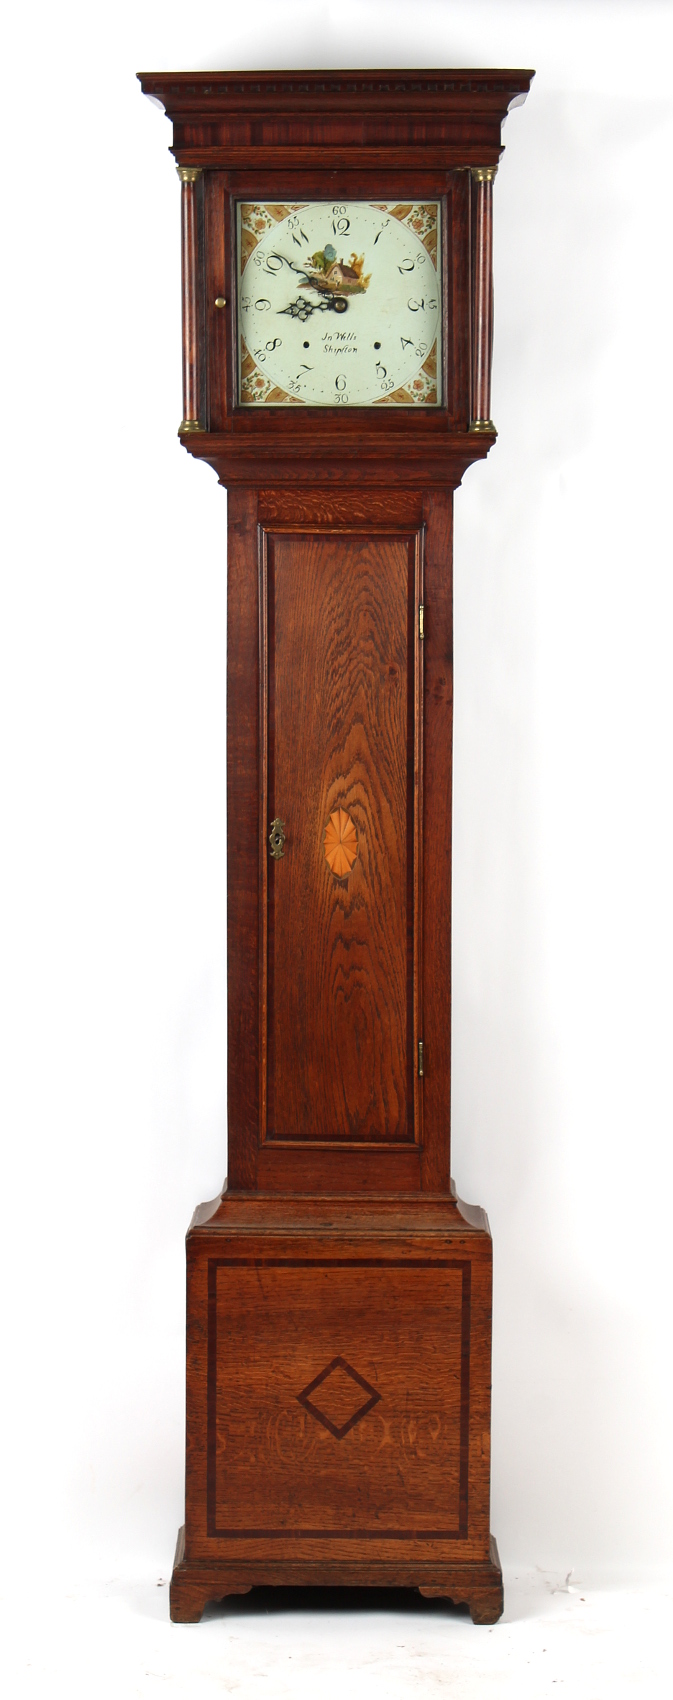 Property of a deceased estate - a George III oak mahogany banded & inlaid 30-hour striking